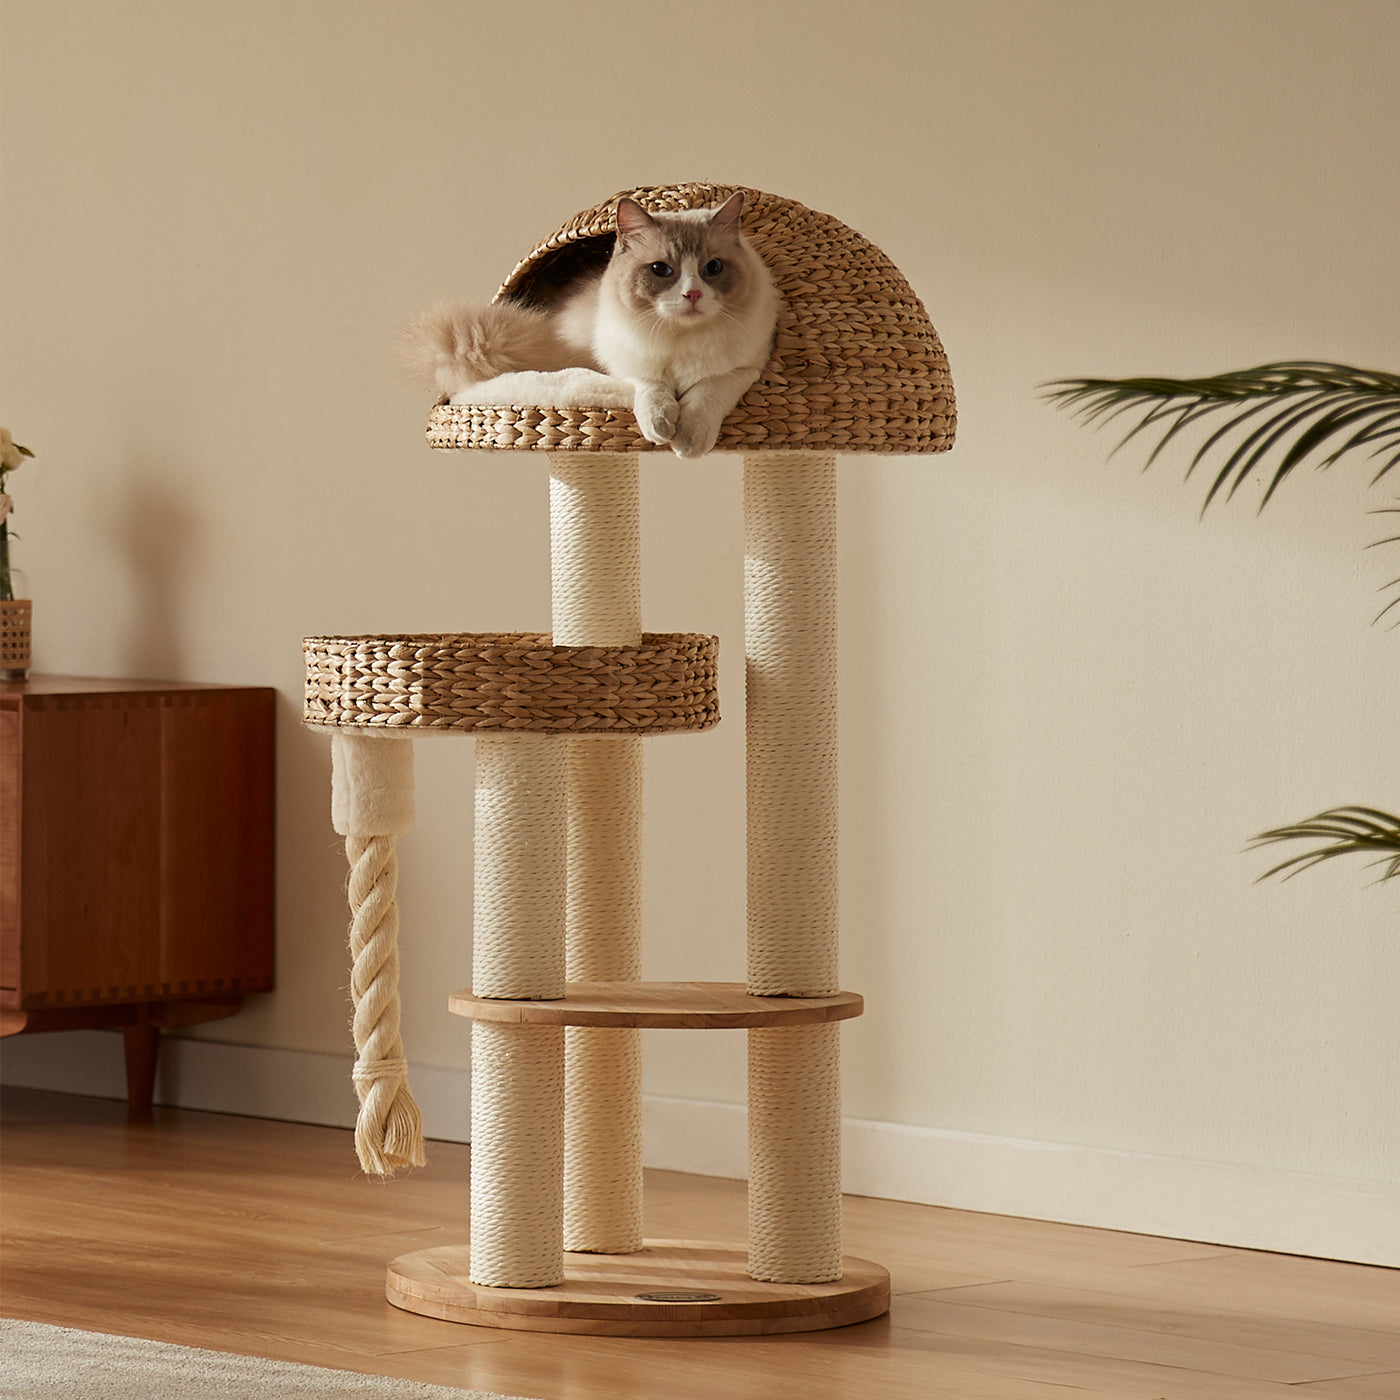 Discover our Luxury Helsinki The Dome Cat Tree. The Perfect Cat Tree For The Ultimate Cat Fun! Featuring Three Scratch Posts, Complete With A Beautiful Wicker & Dome Design! Available Now at Lords & Labradors 